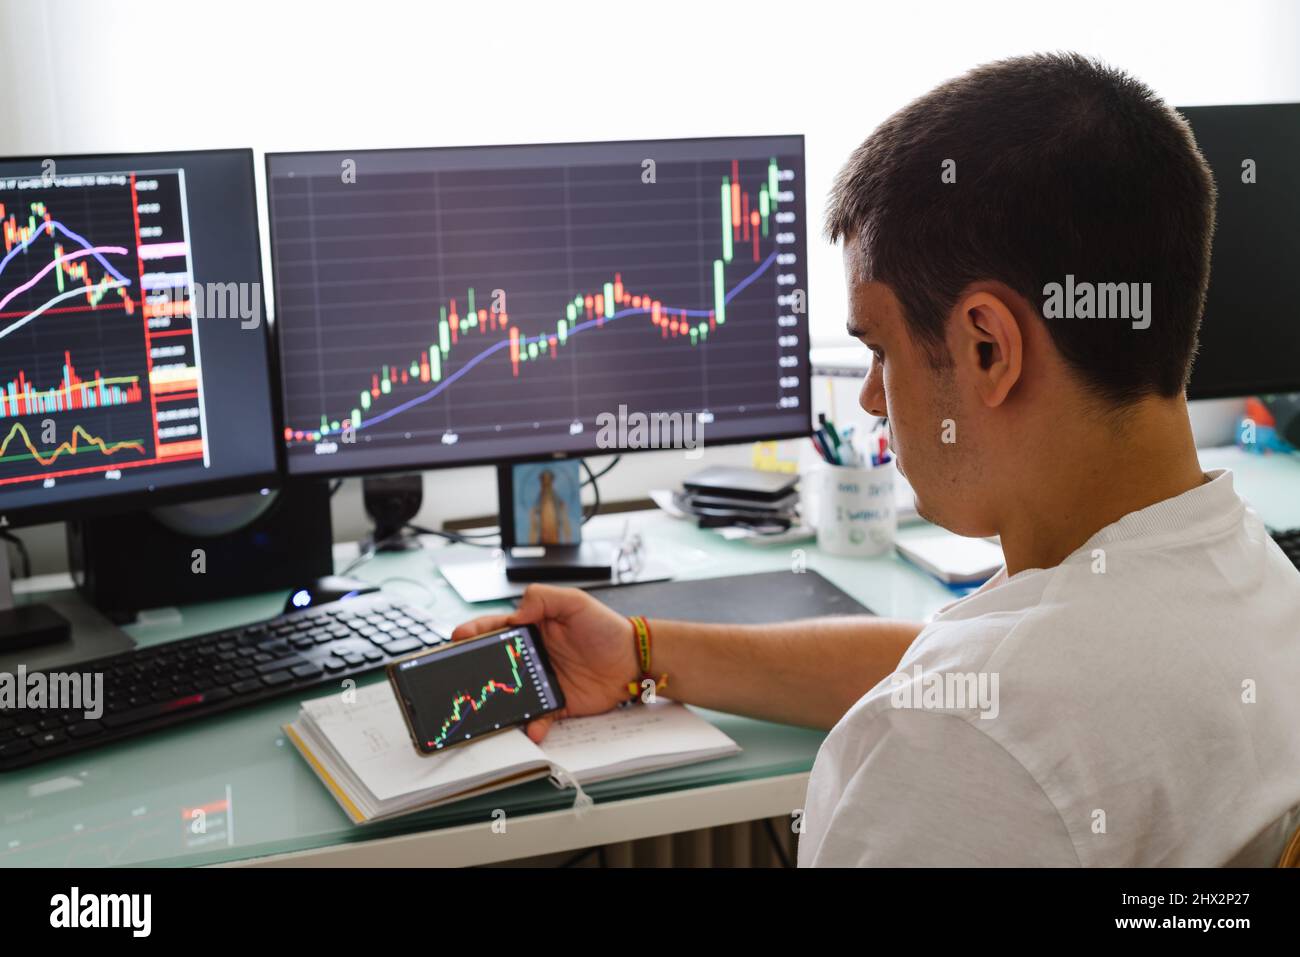 Busy working day at home. Side view of successful young trader in casual wear working with charts and market reports on computer screens in his home. Stock Photo